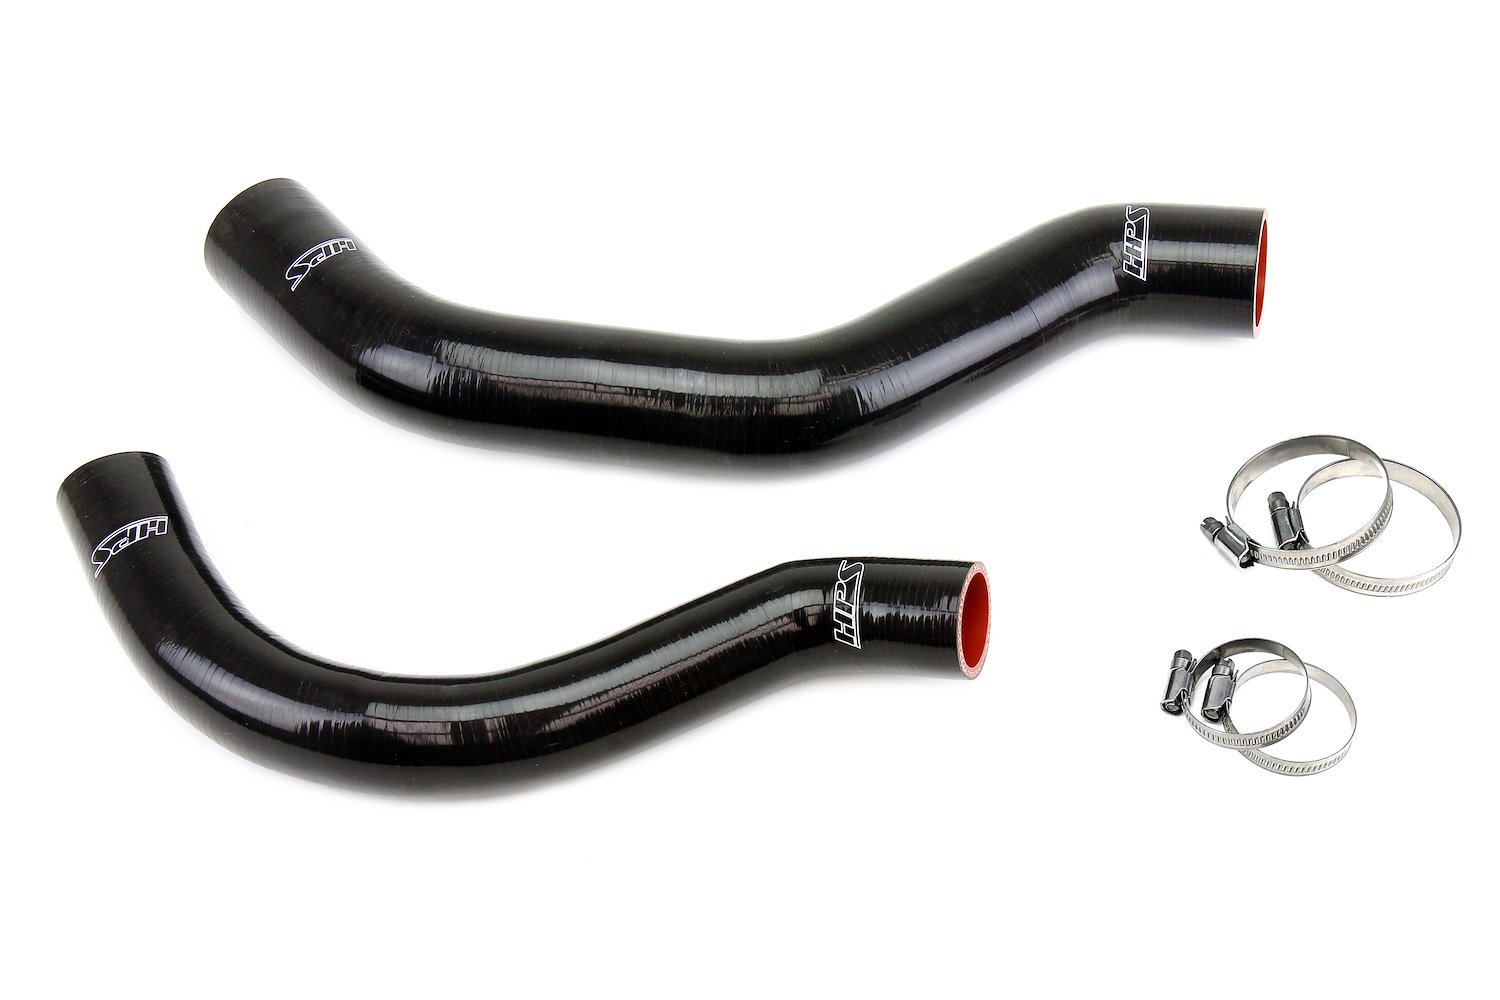 57-2001-BLK Radiator Hose Kit, 3-Ply Reinforced Silicone, Replaces Rubber Radiator Coolant Hoses